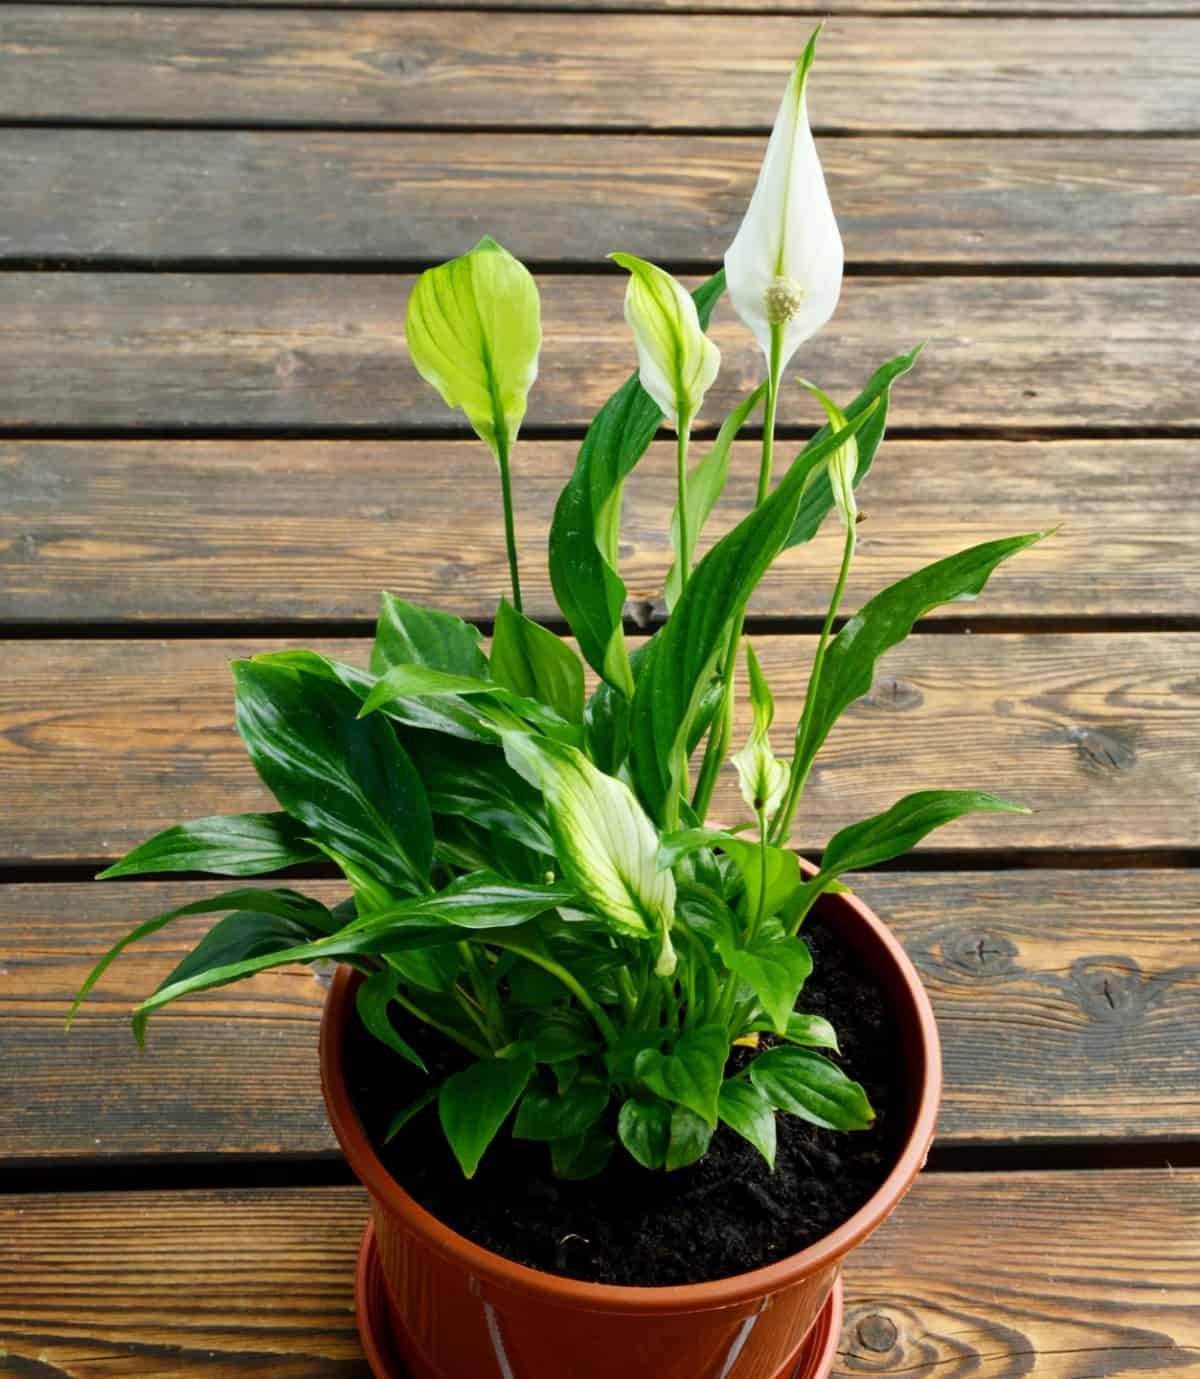 The flowers of the peace lily have a tropical look.